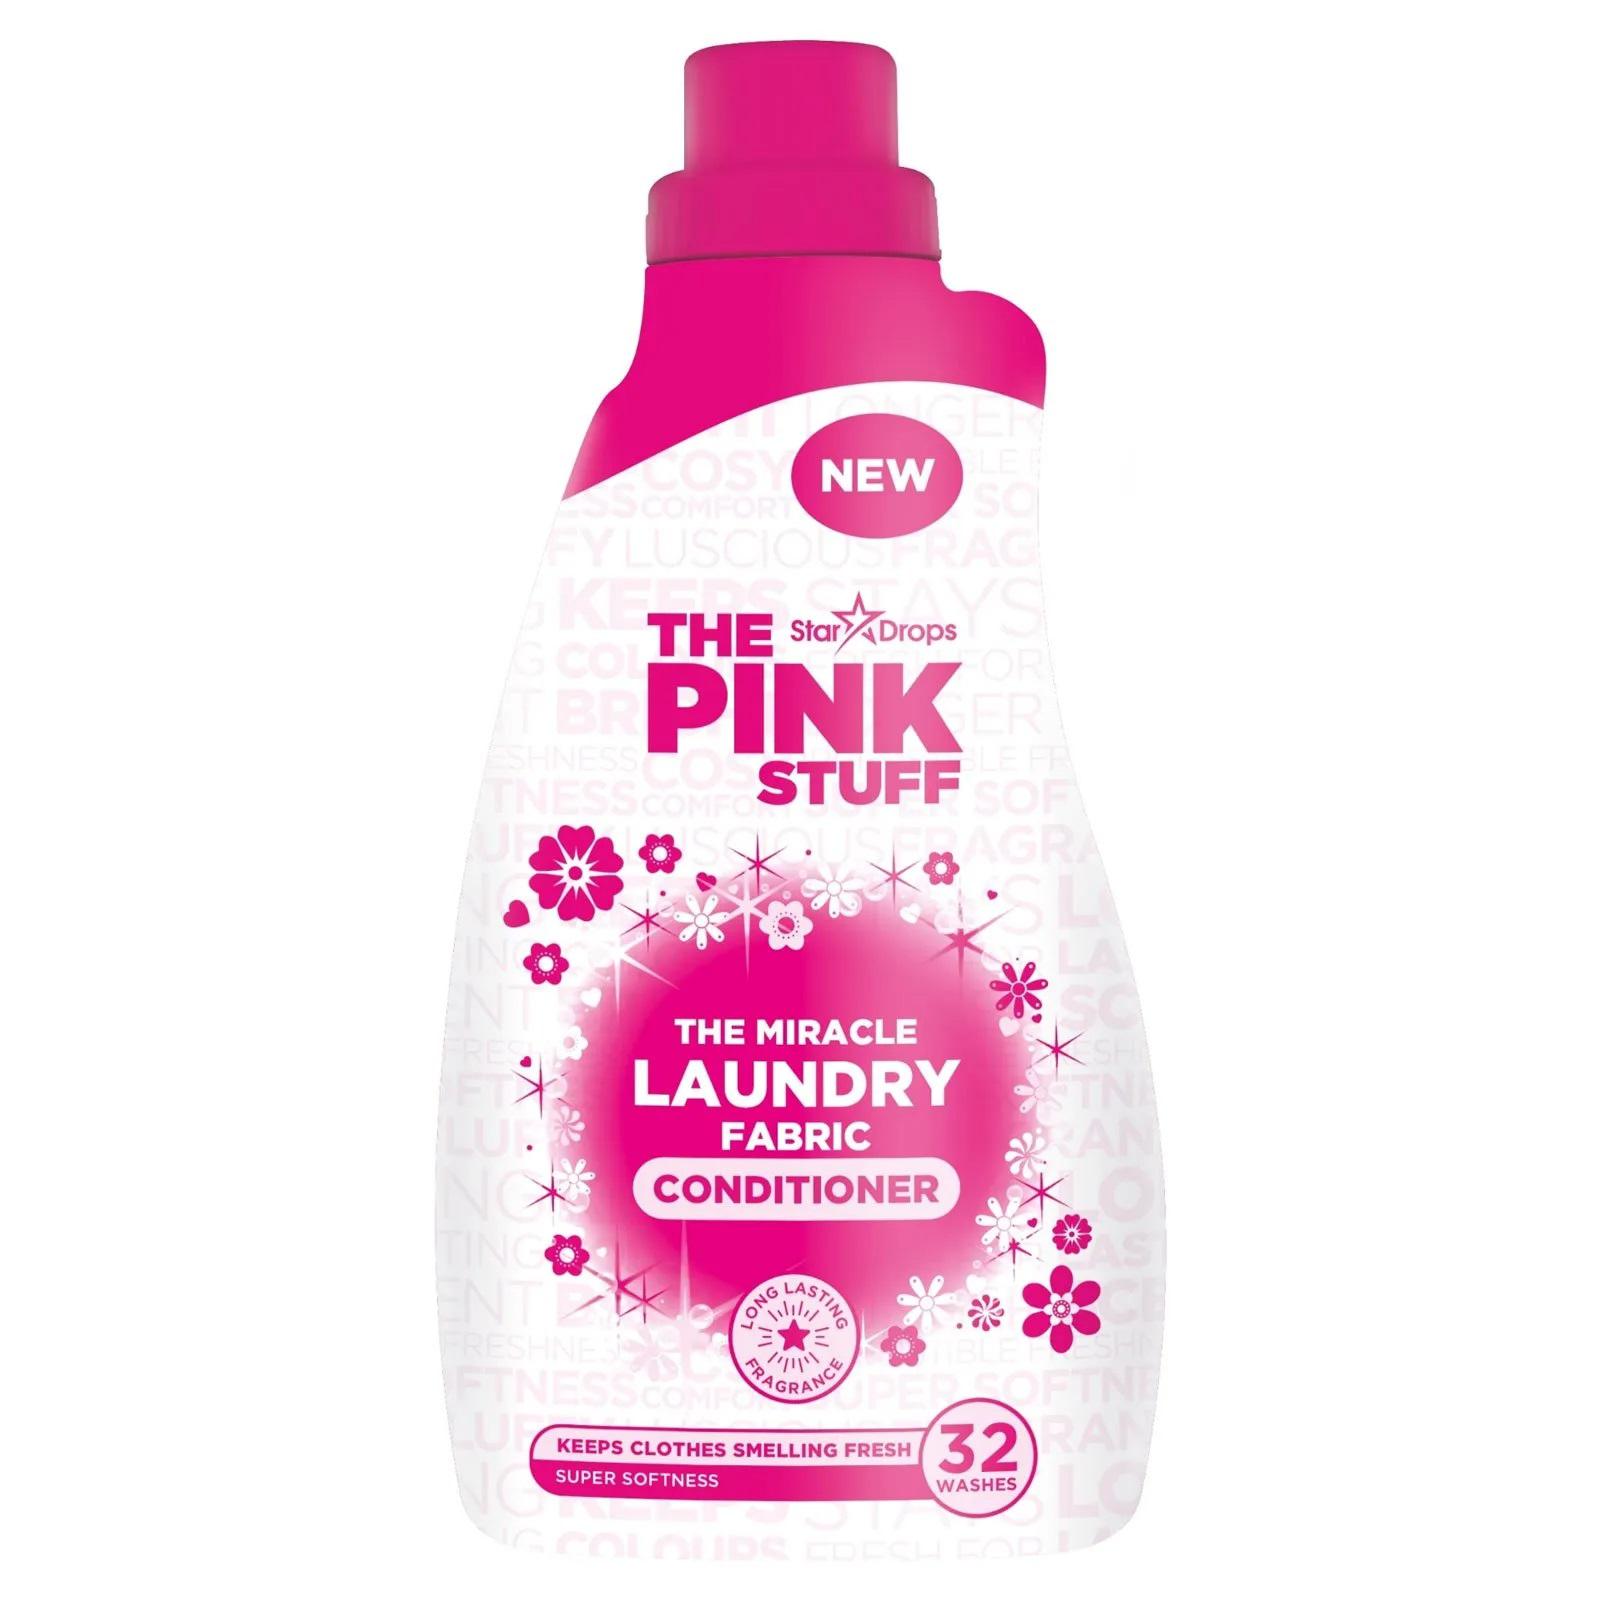 https://www.iwonatec.com/file/the-pink-stuff-laundry-fabric-conditioner-32-washes-960ml.jpg